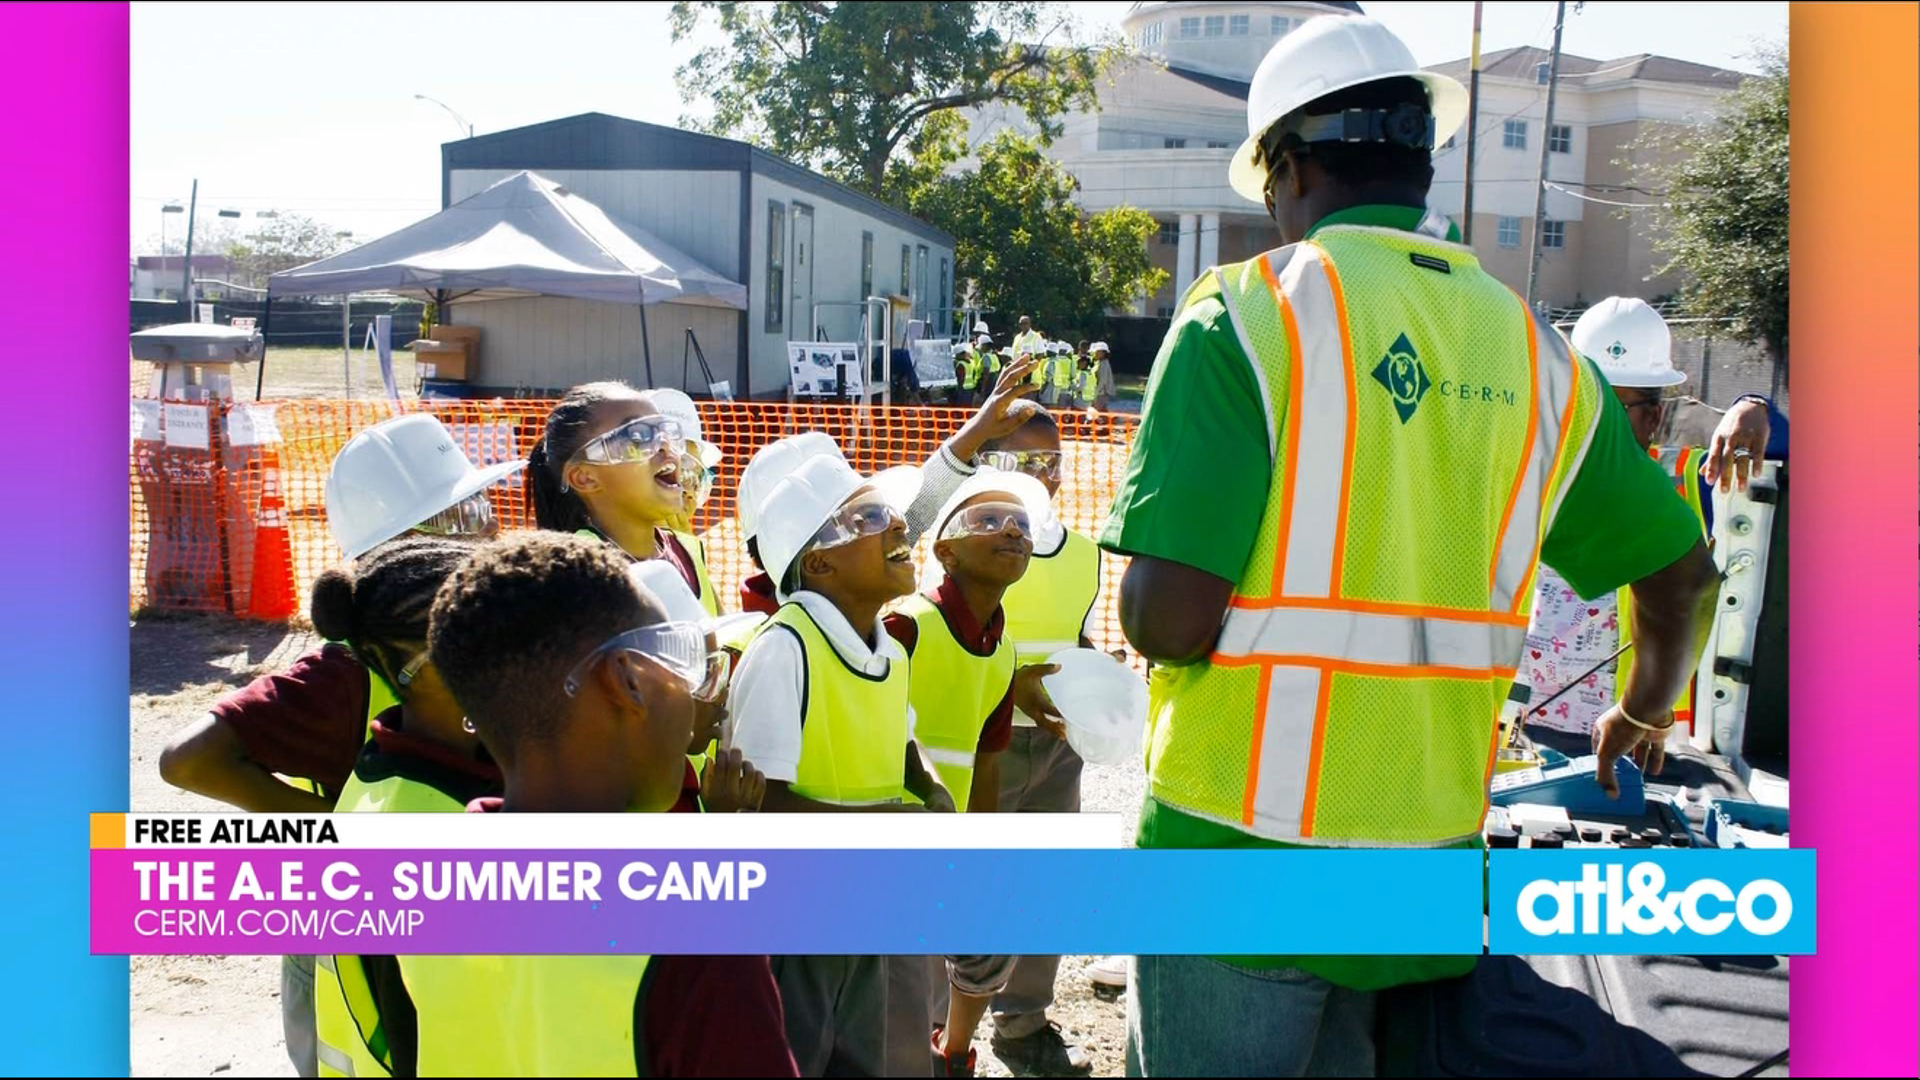 Christine and Cara share free summer camps and fun family activities in and around Atlanta.